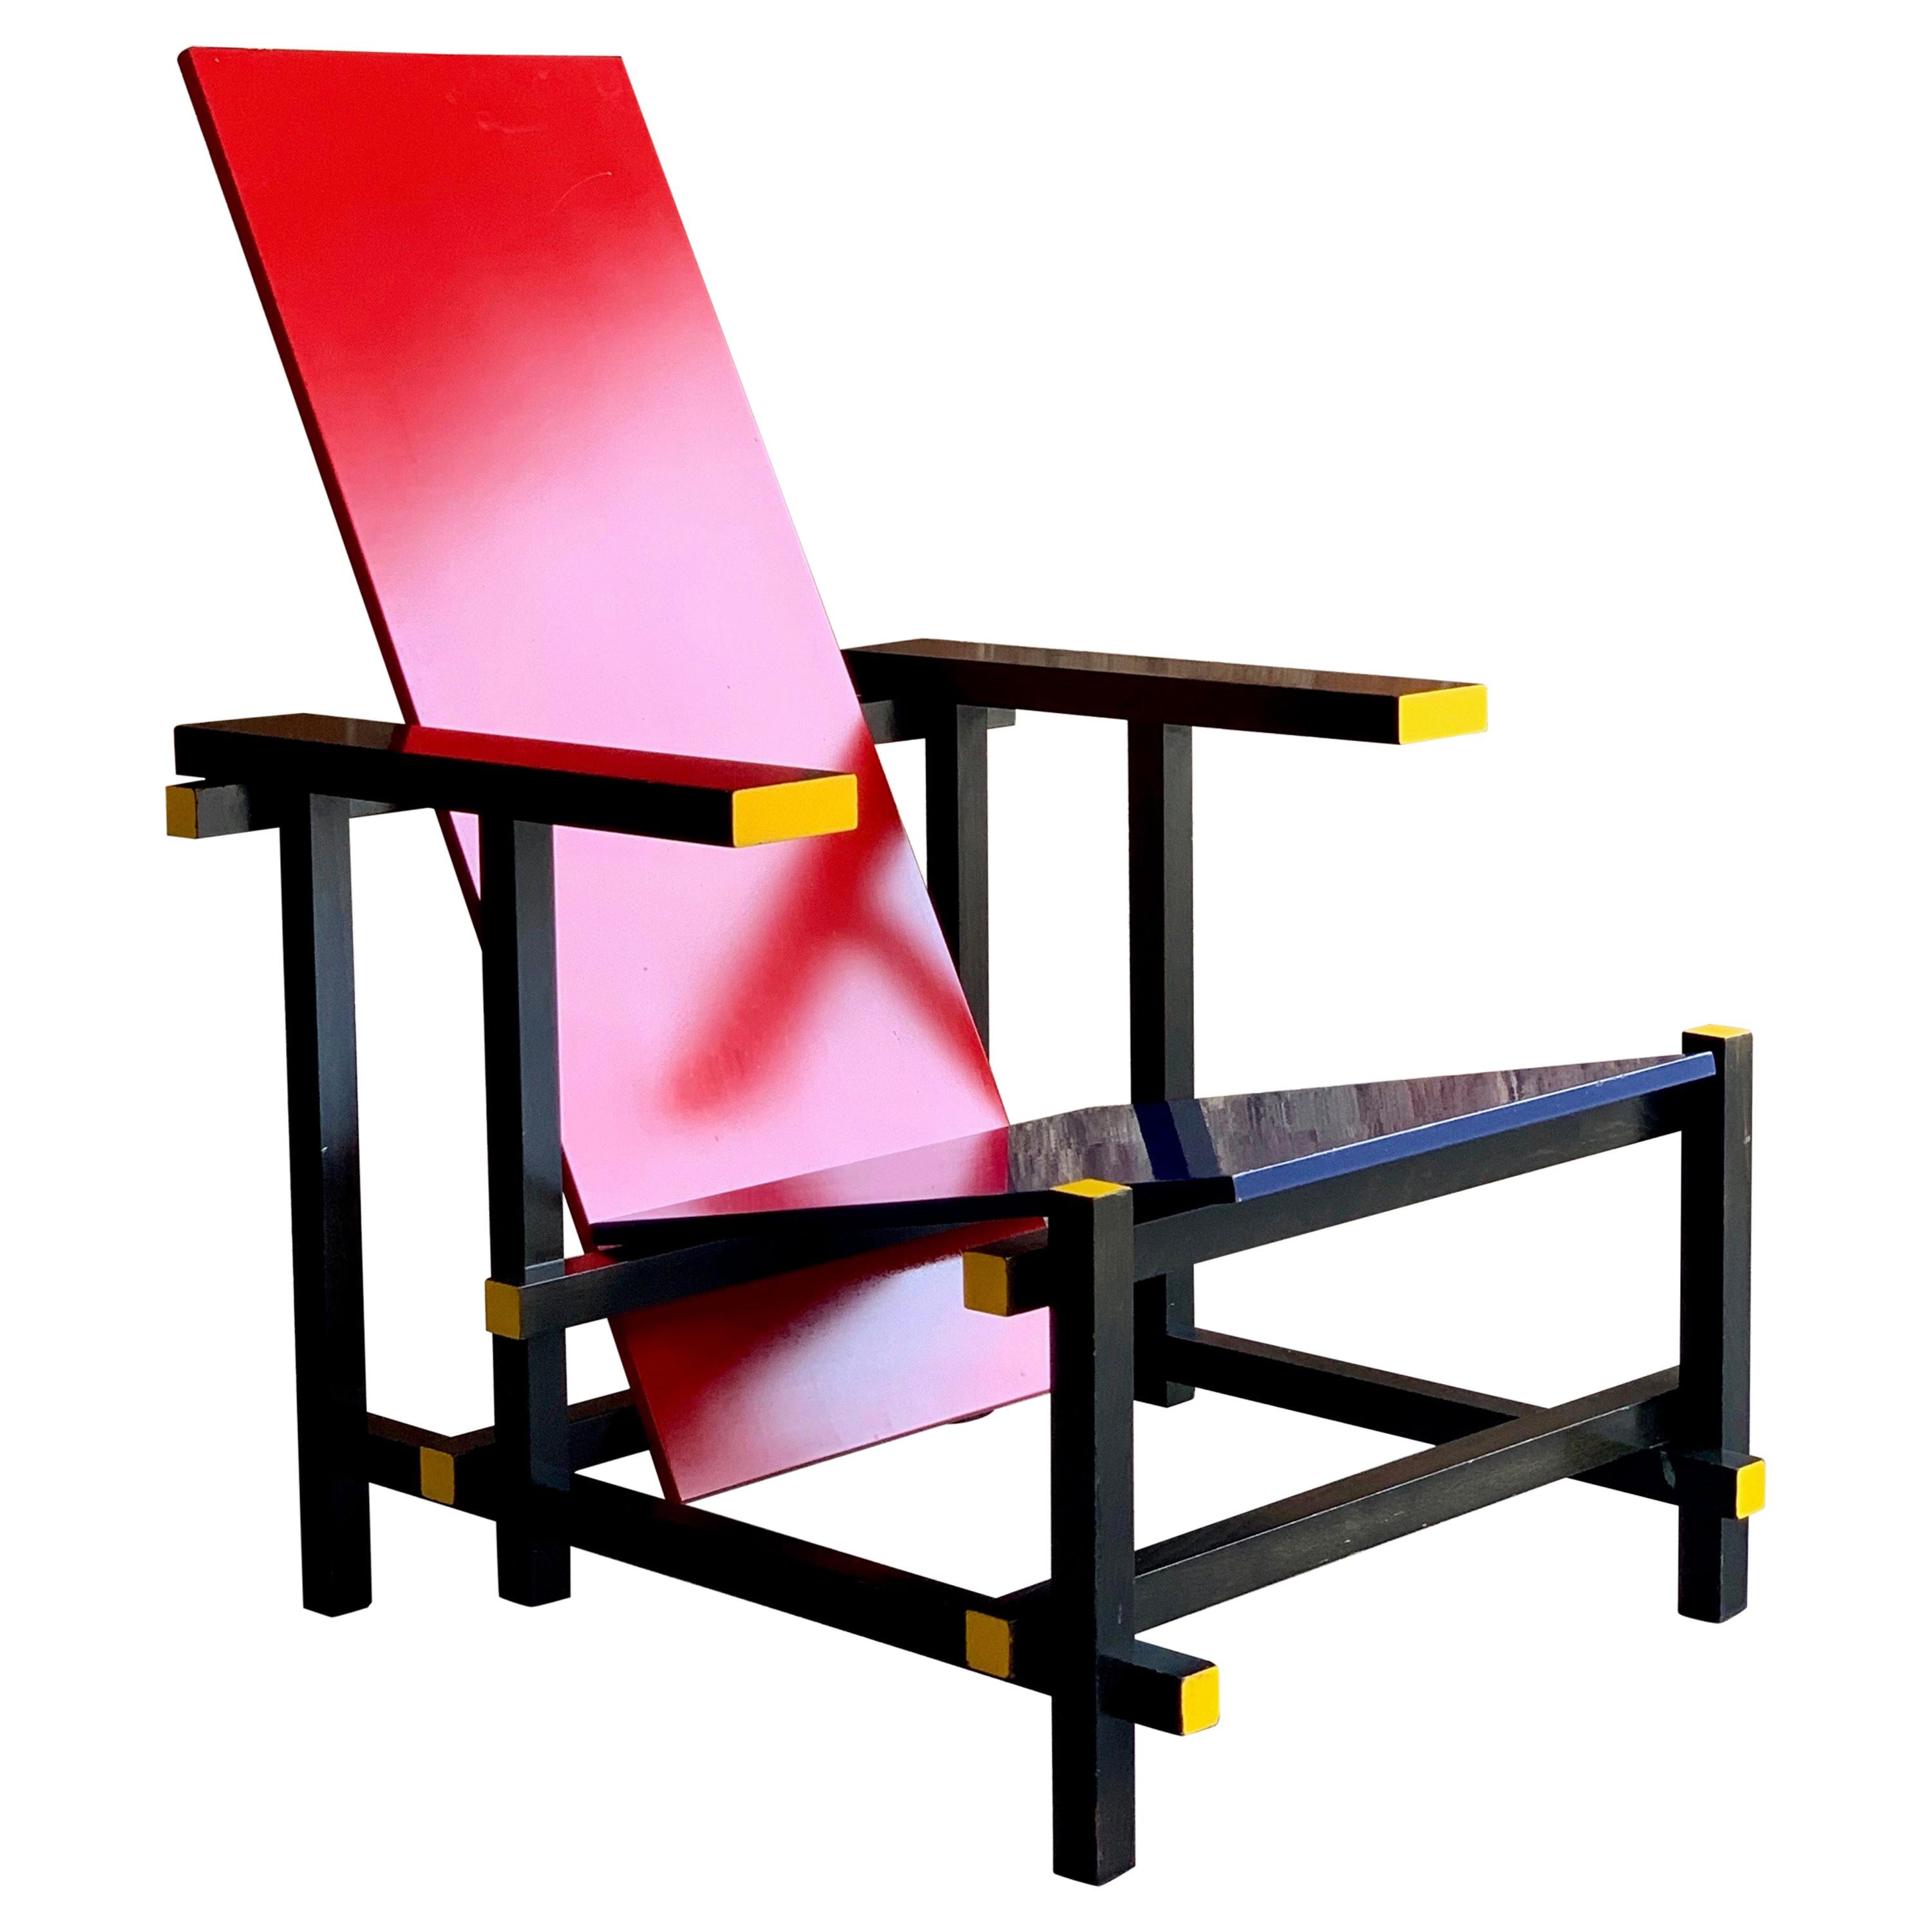 Cassina Red and Blue Chair by Gerrit T Rietveld Numbered 8488, Italy, circa 1970